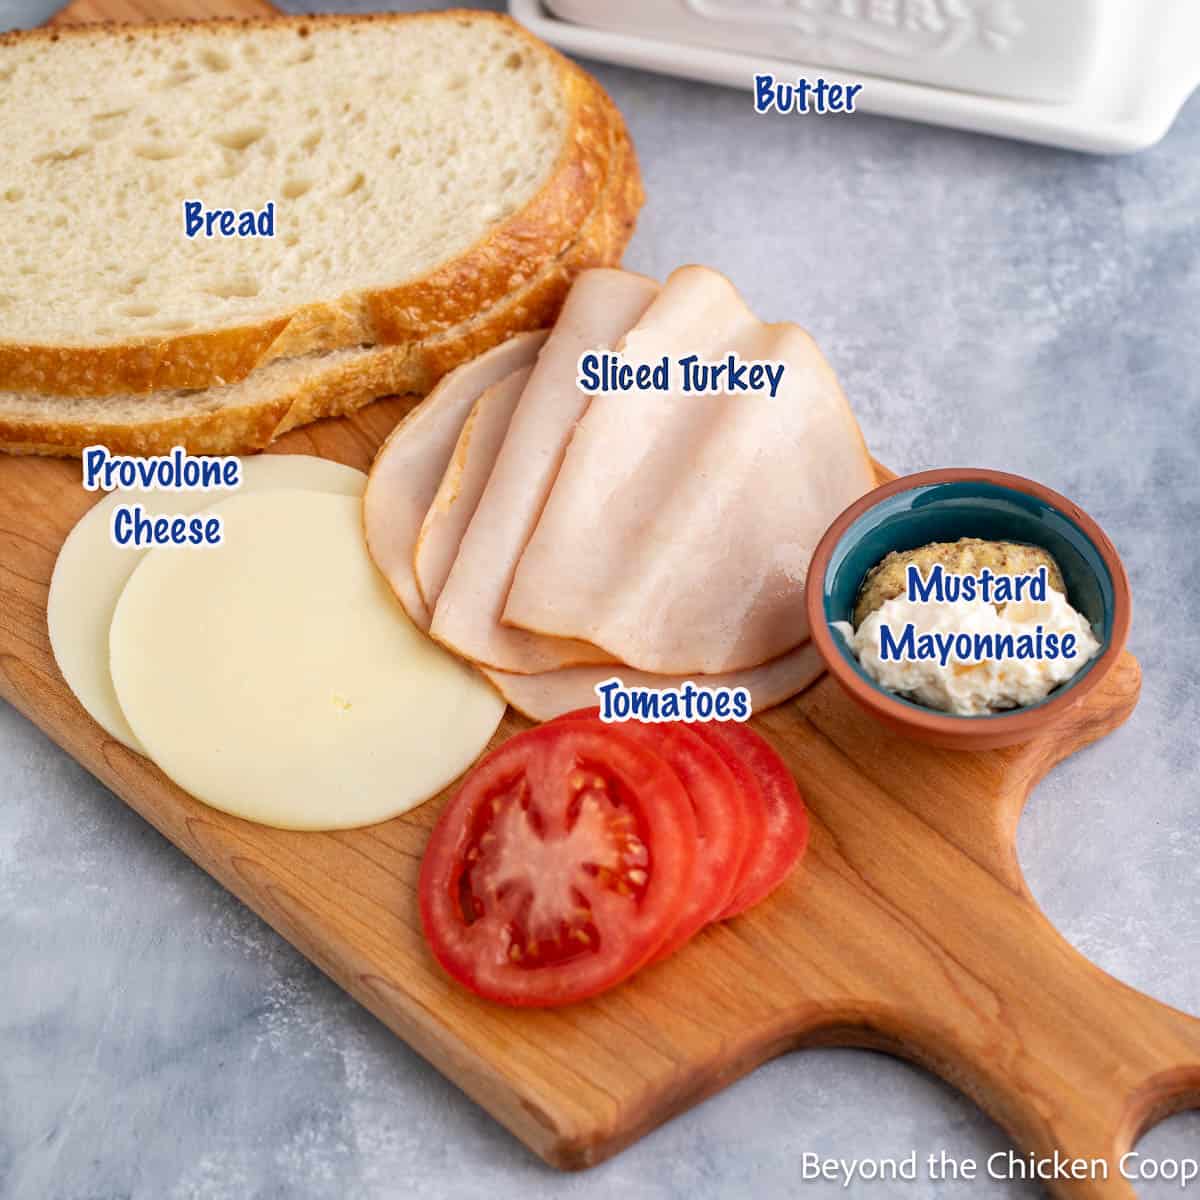 Ingredients for making a grilled turkey sandwich. 